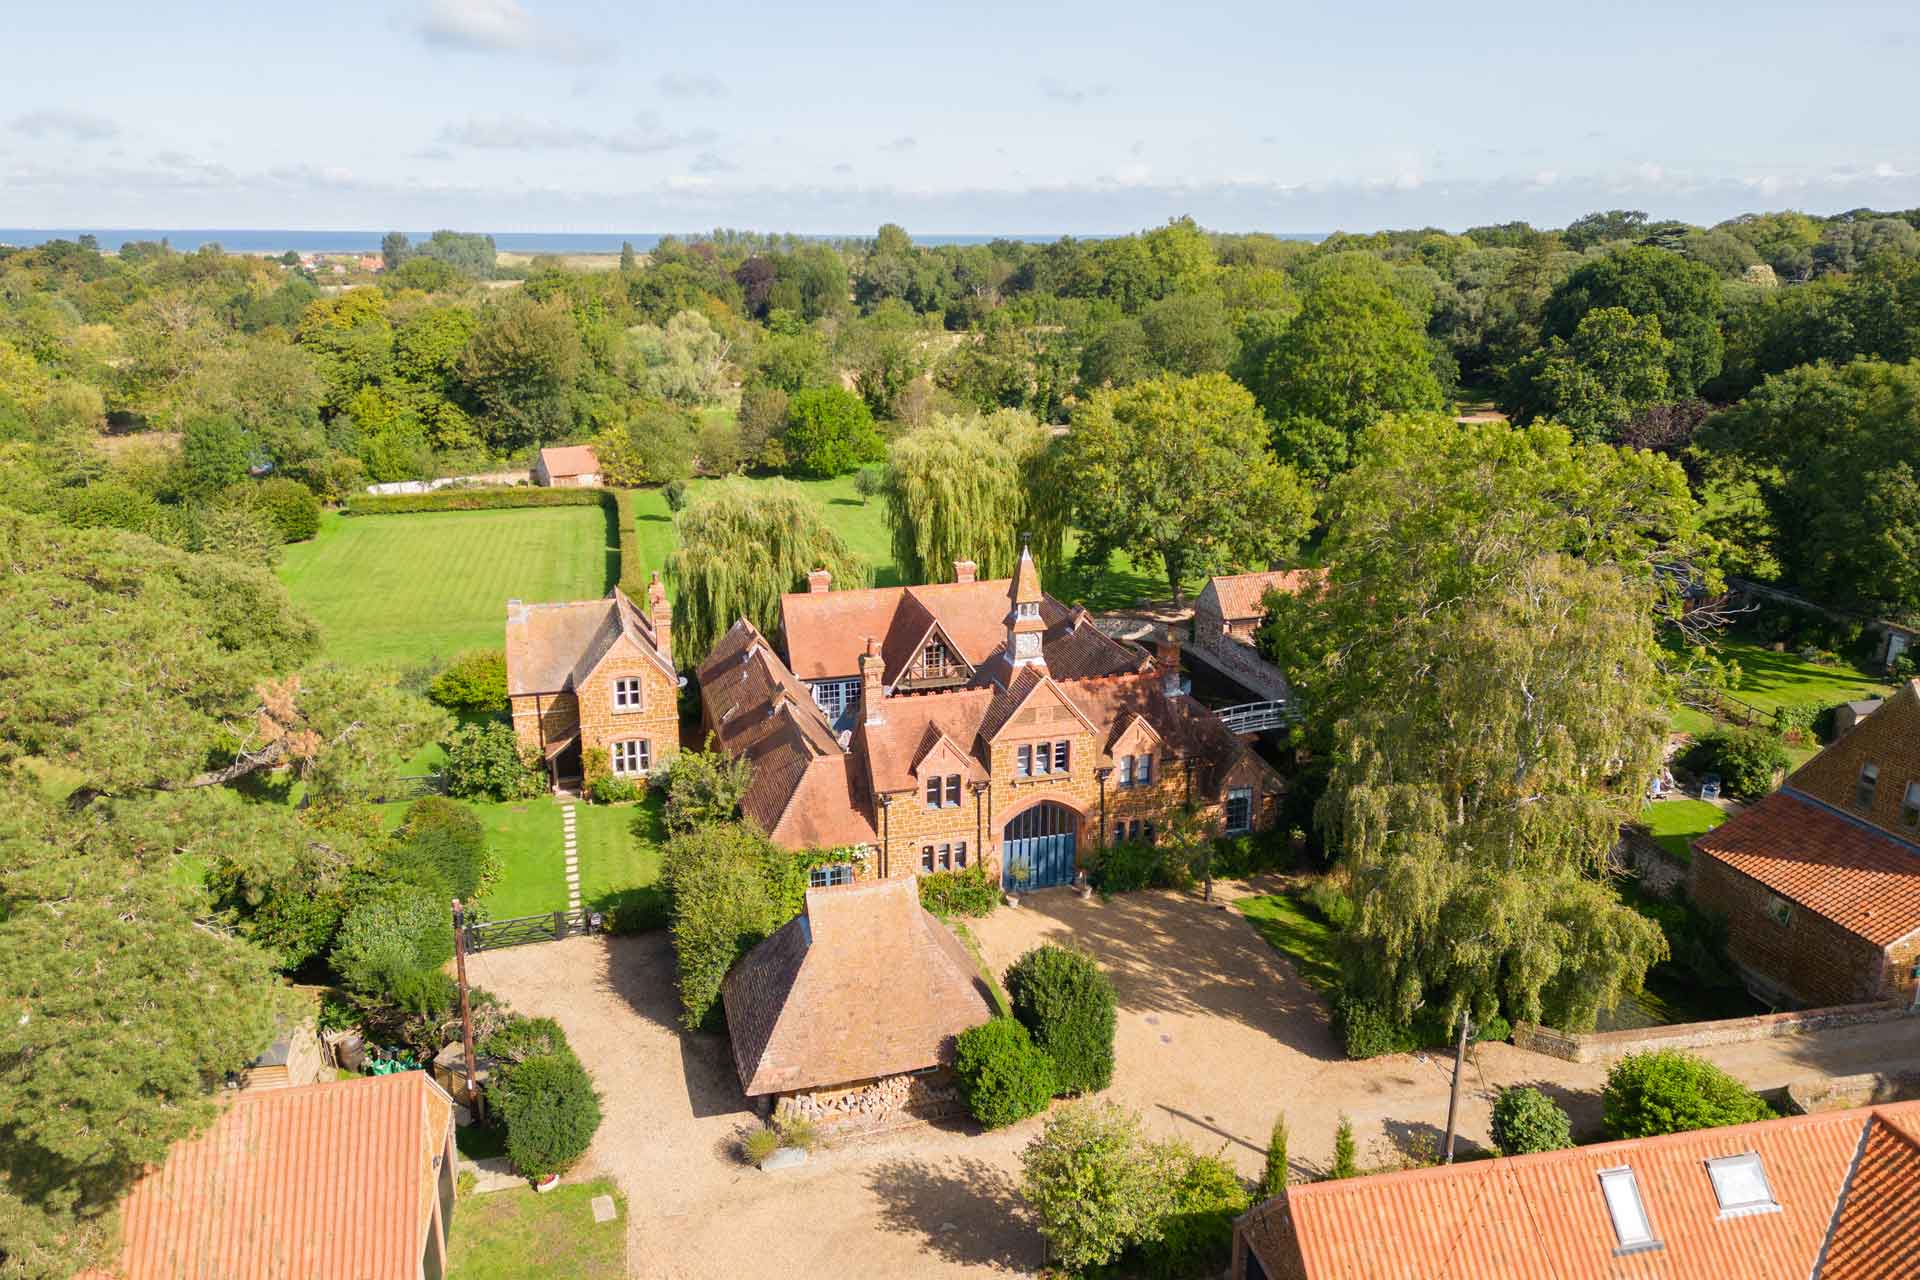 Aerial view of red brick country home with clock tower and woodland surrounding.